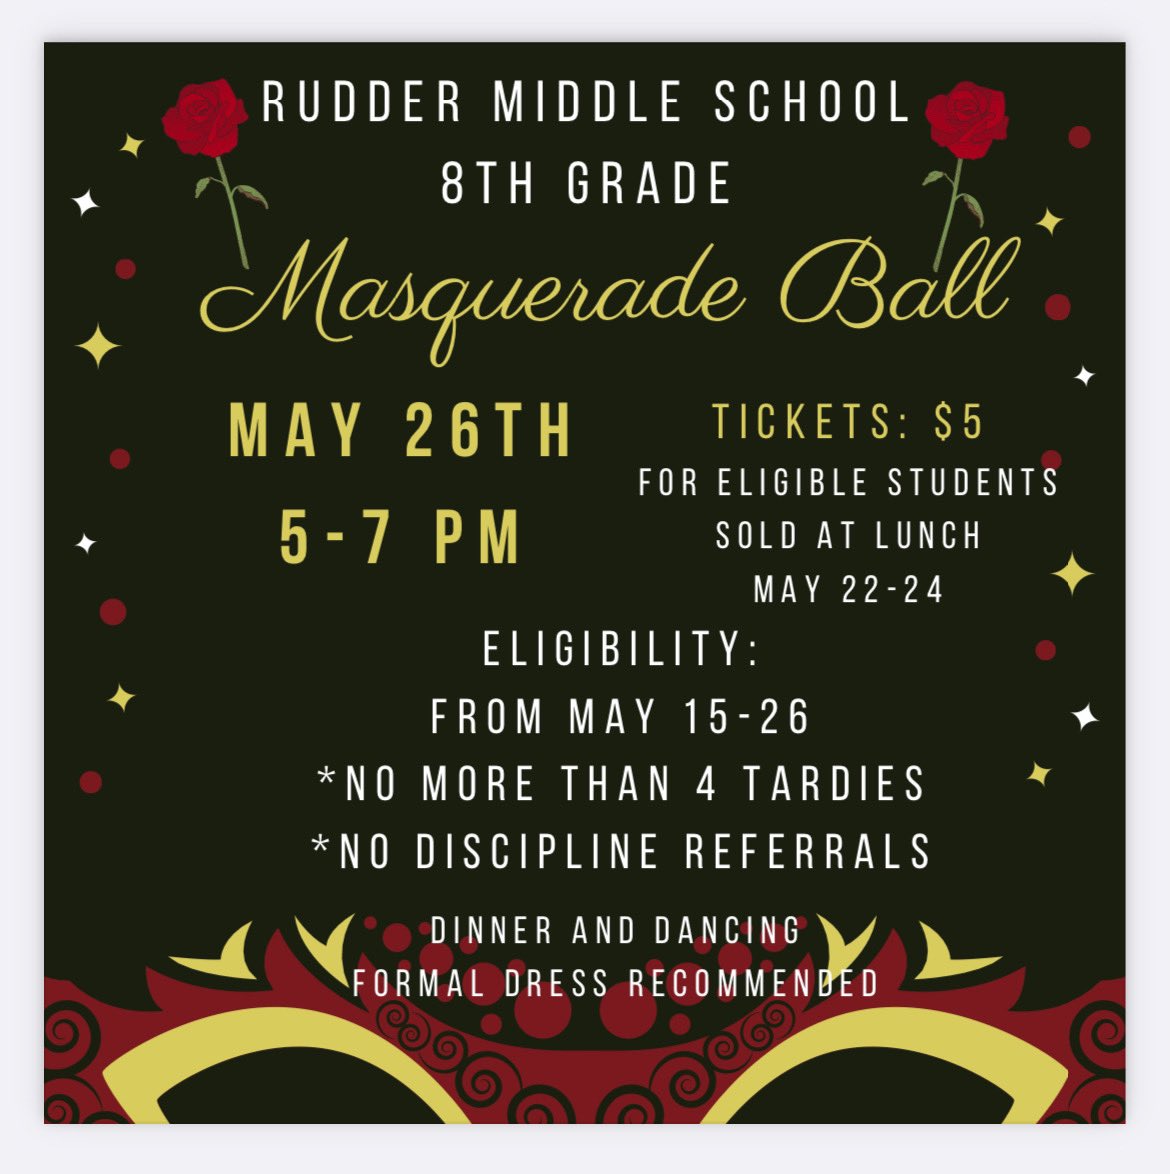 Today is the last day to purchase tickets to the 8th grade dance. Looking forward to a great evening! #NISD #RangersLEAD